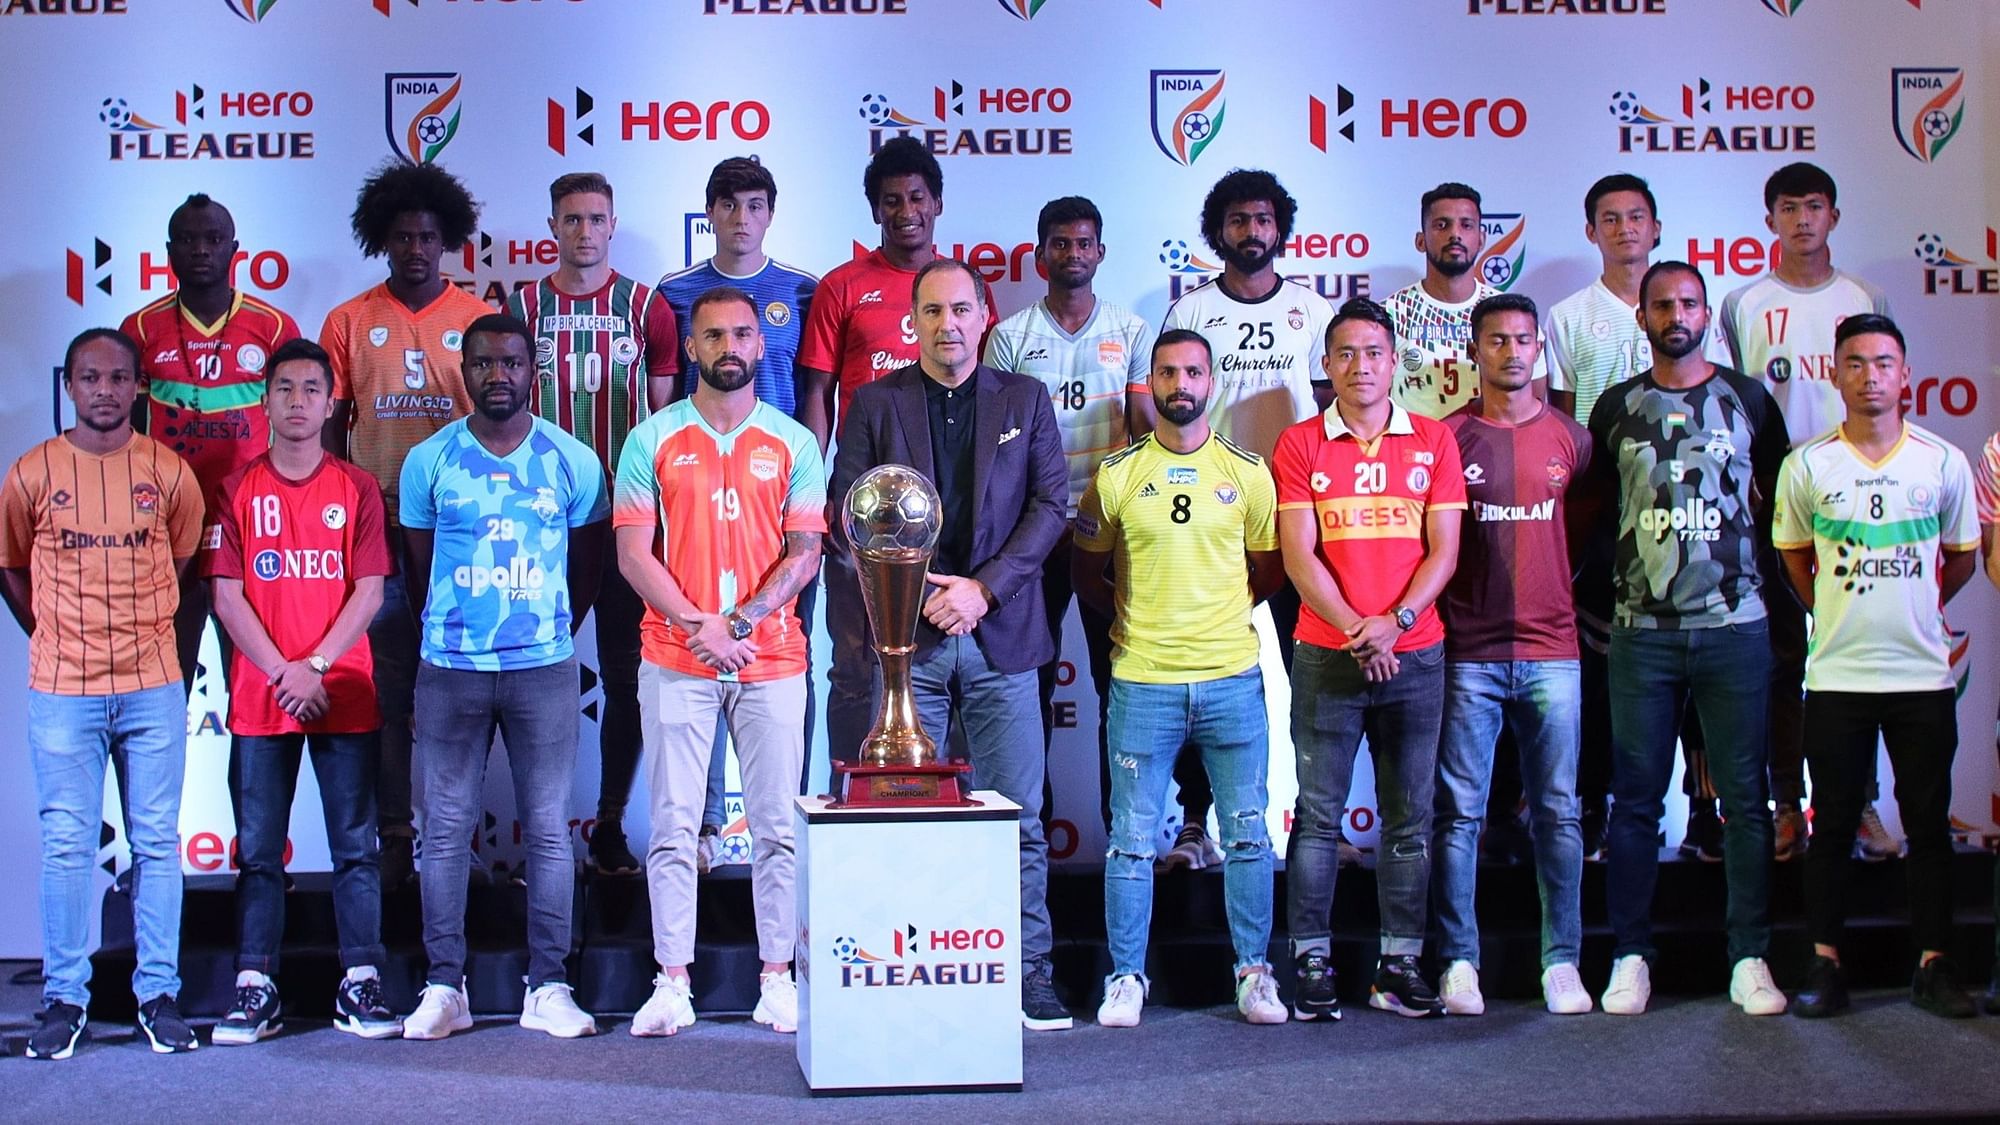 The 13th edition of the I-League will get underway from Saturday, 30 November.